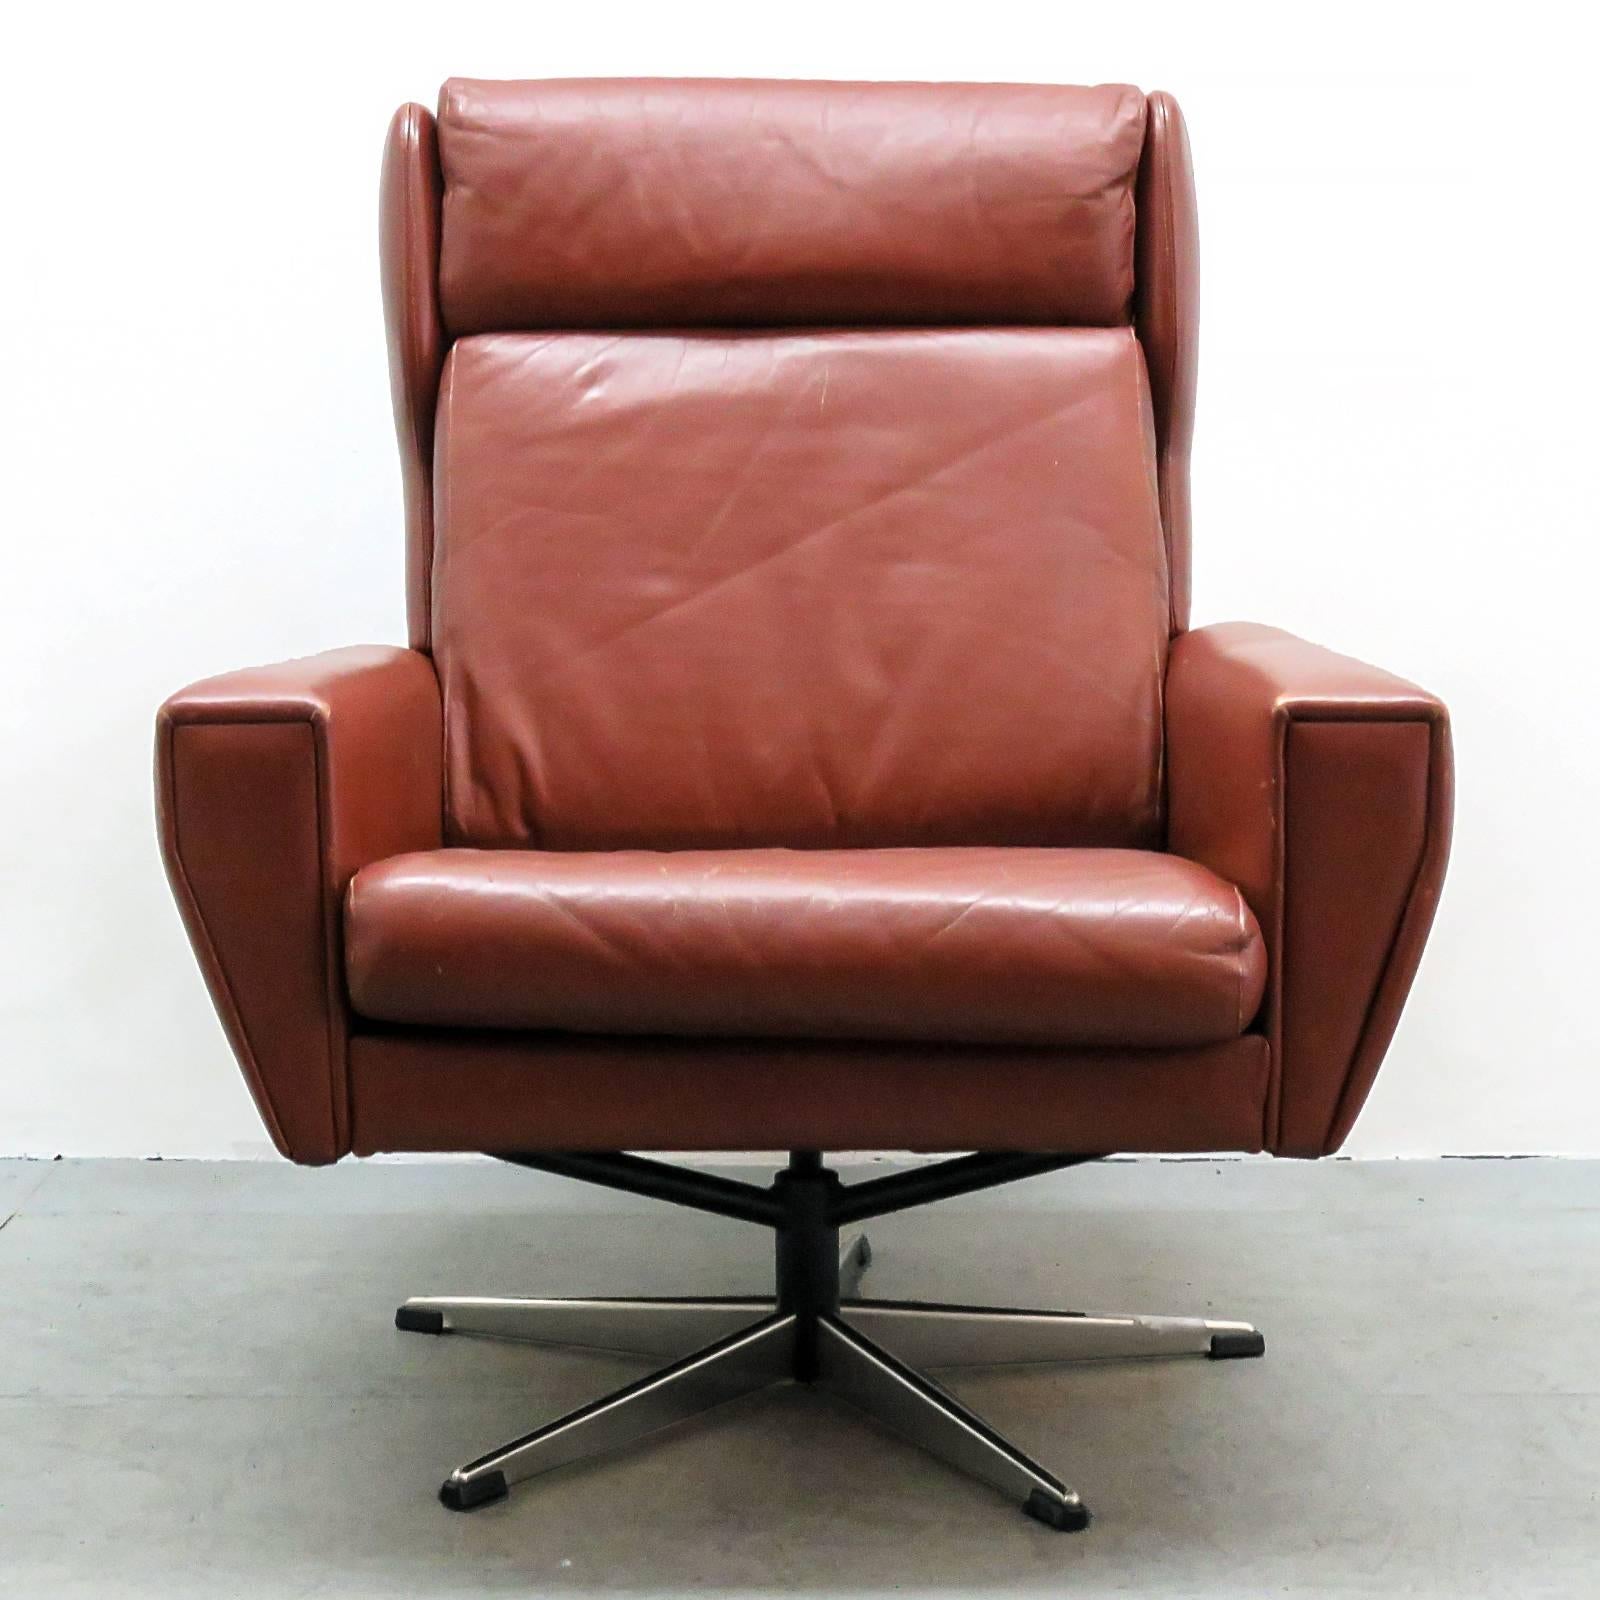 Wonderful Georg Thams for Lystager Industri A/S wing back lounge chair in cognac leather and chrome-plated aluminum.